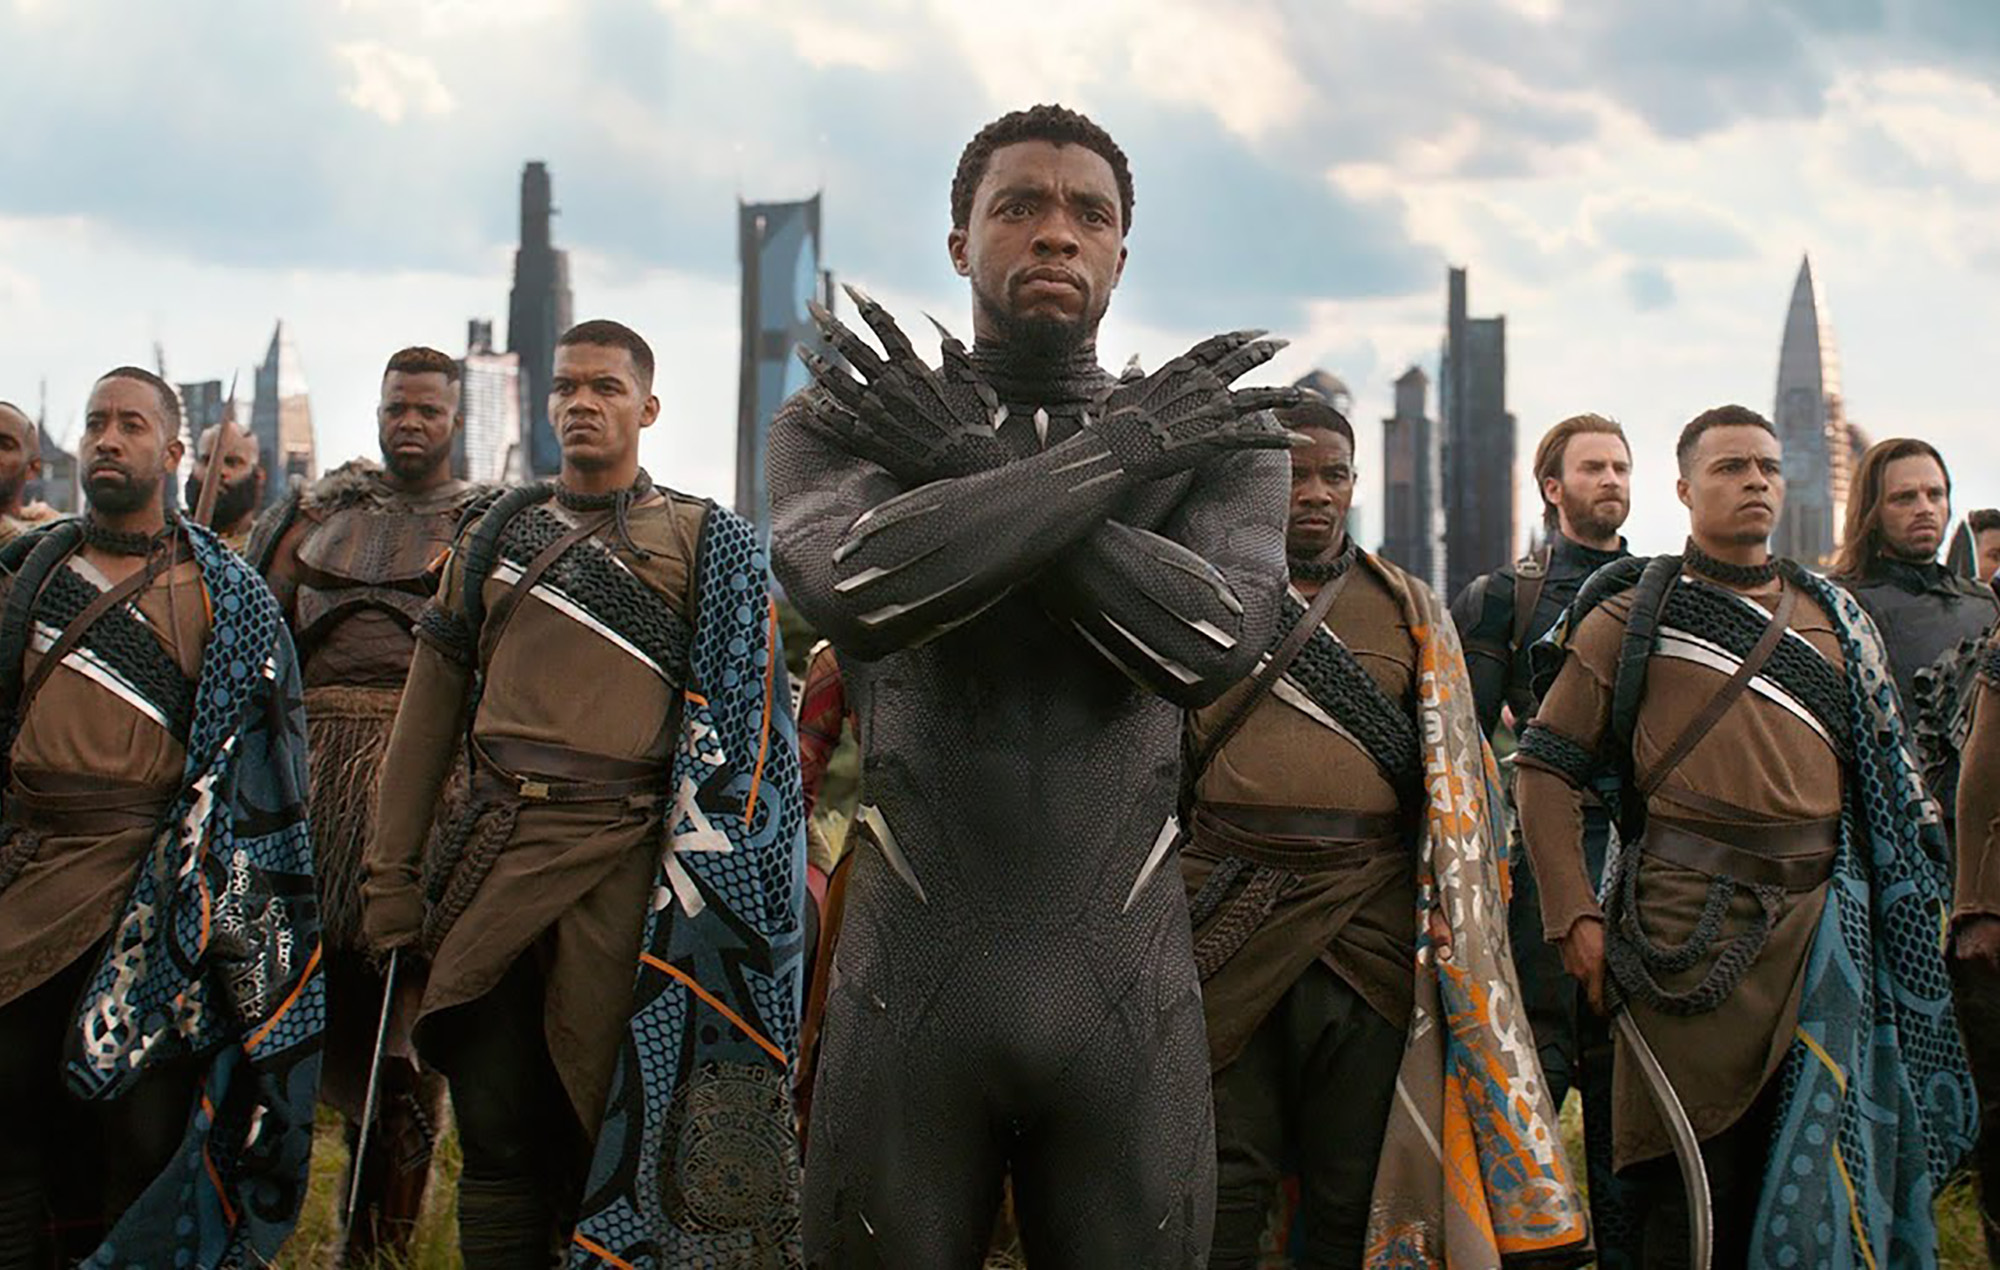 Find Out How You Can Be an EXTRA in Marvel's 'Black Panther: Wakanda Forever'